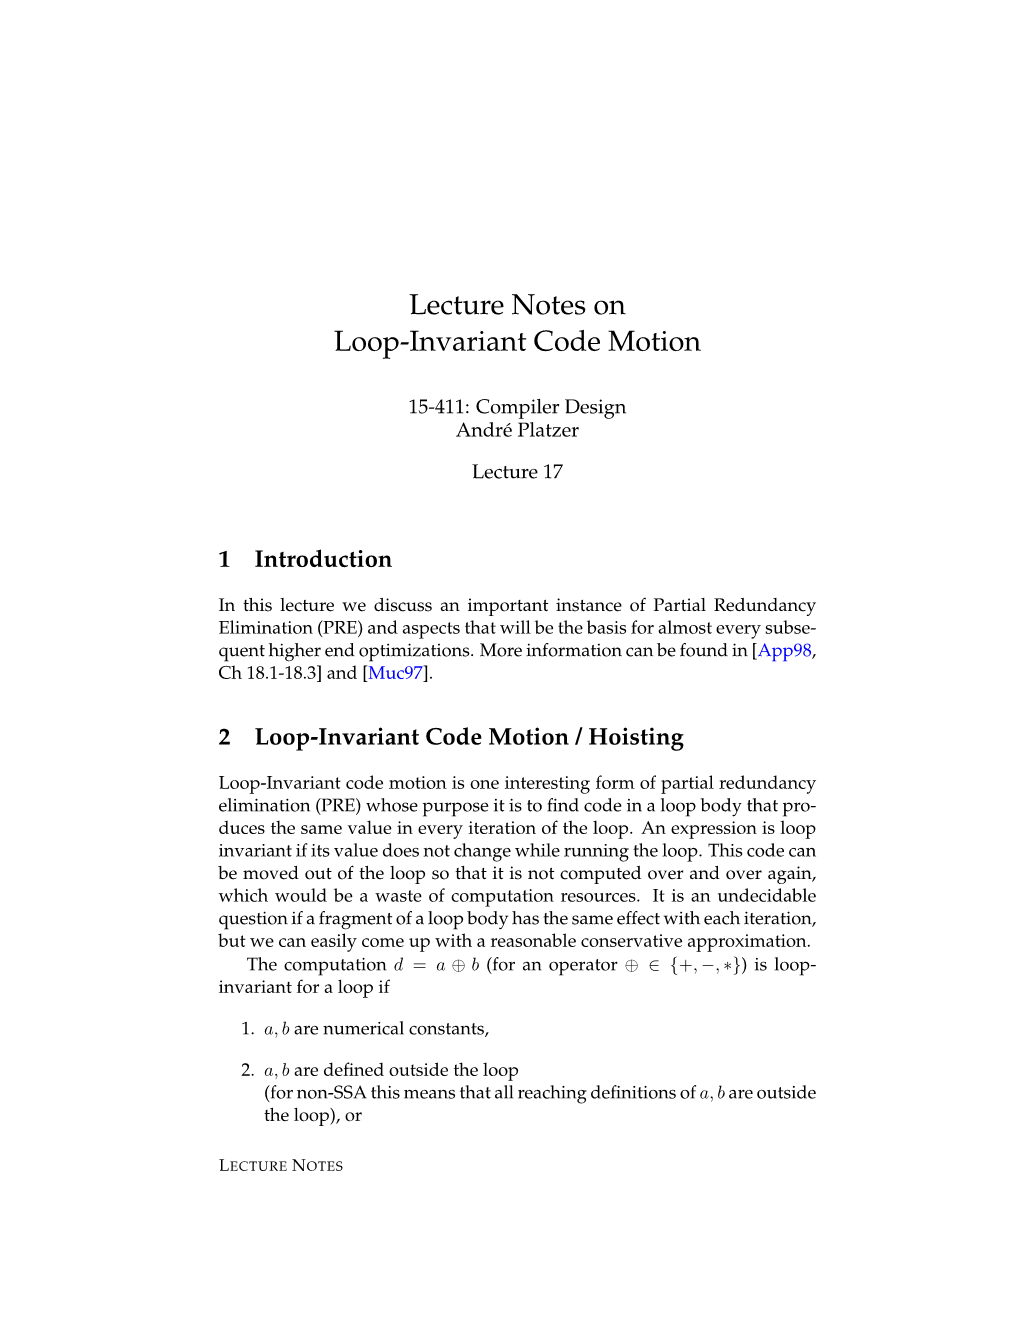 Lecture Notes on Loop-Invariant Code Motion